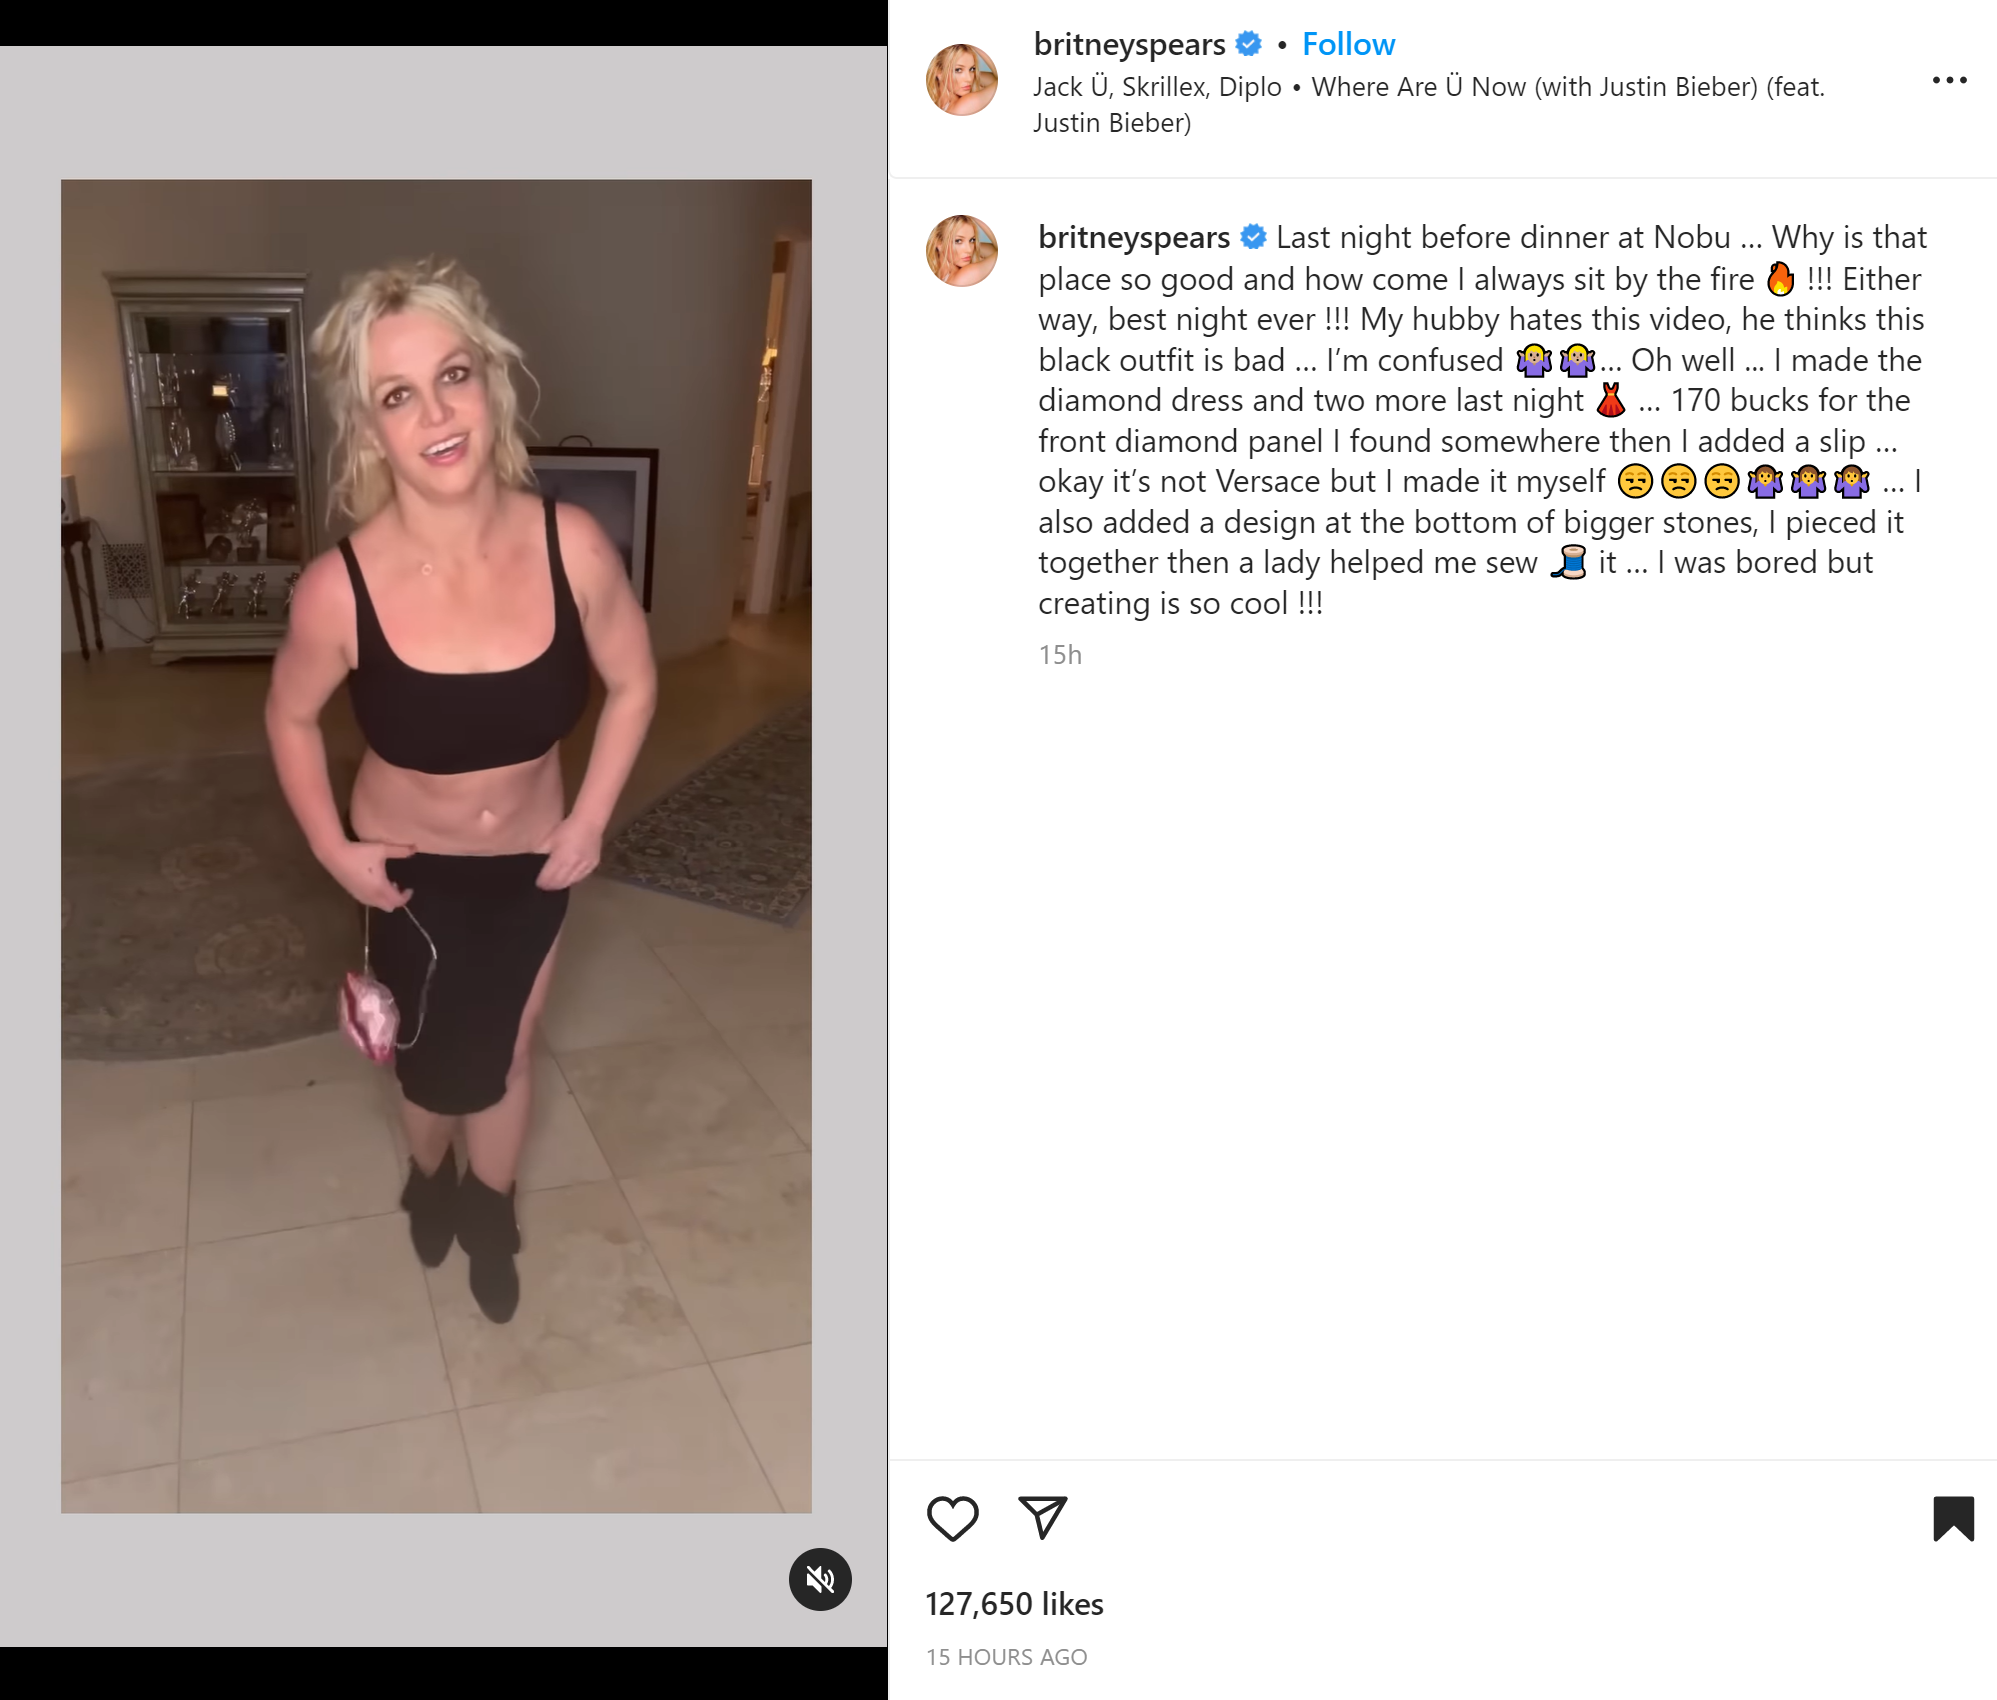 Britney Spears posts same video with a different caption about her dinner at Nobu on February 18